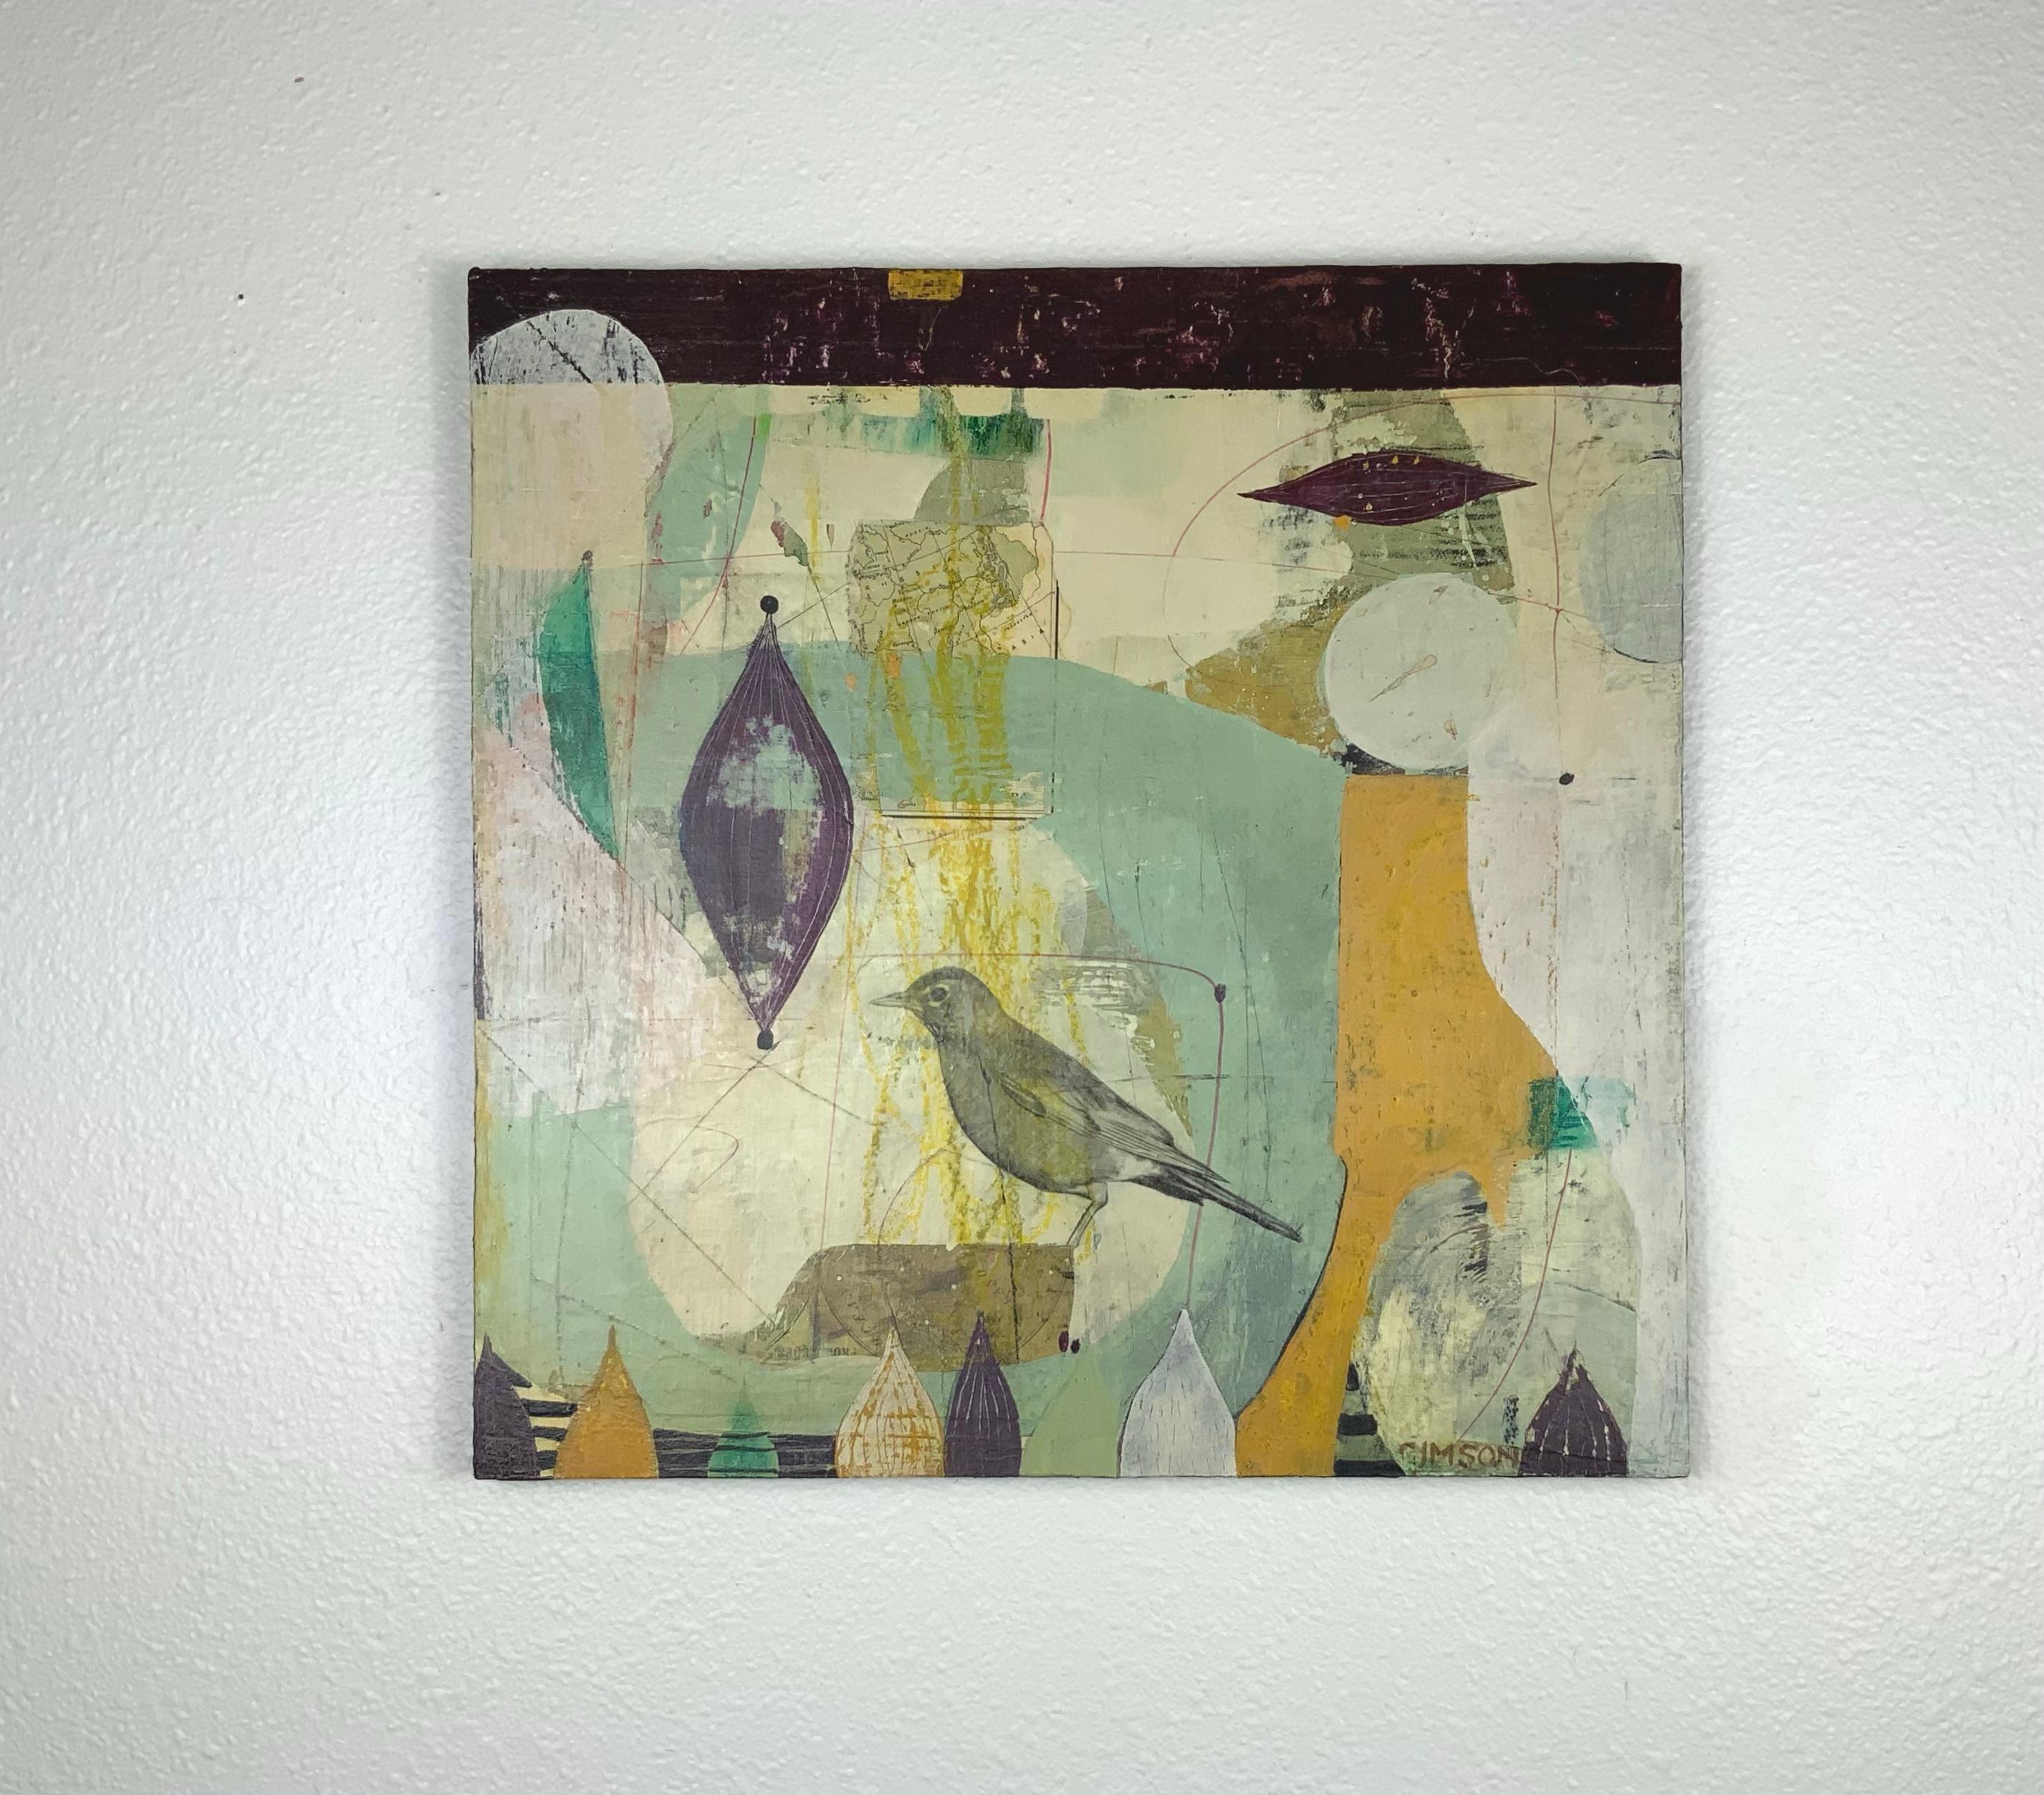 <p>Artist Comments<br>Artist Steph Gimson collages vintage prints and abstract structures to build captivating narratives. A bird perches in the center, ready to take flight. Steph attaches pieces of maps suggesting its next course of travel. Part